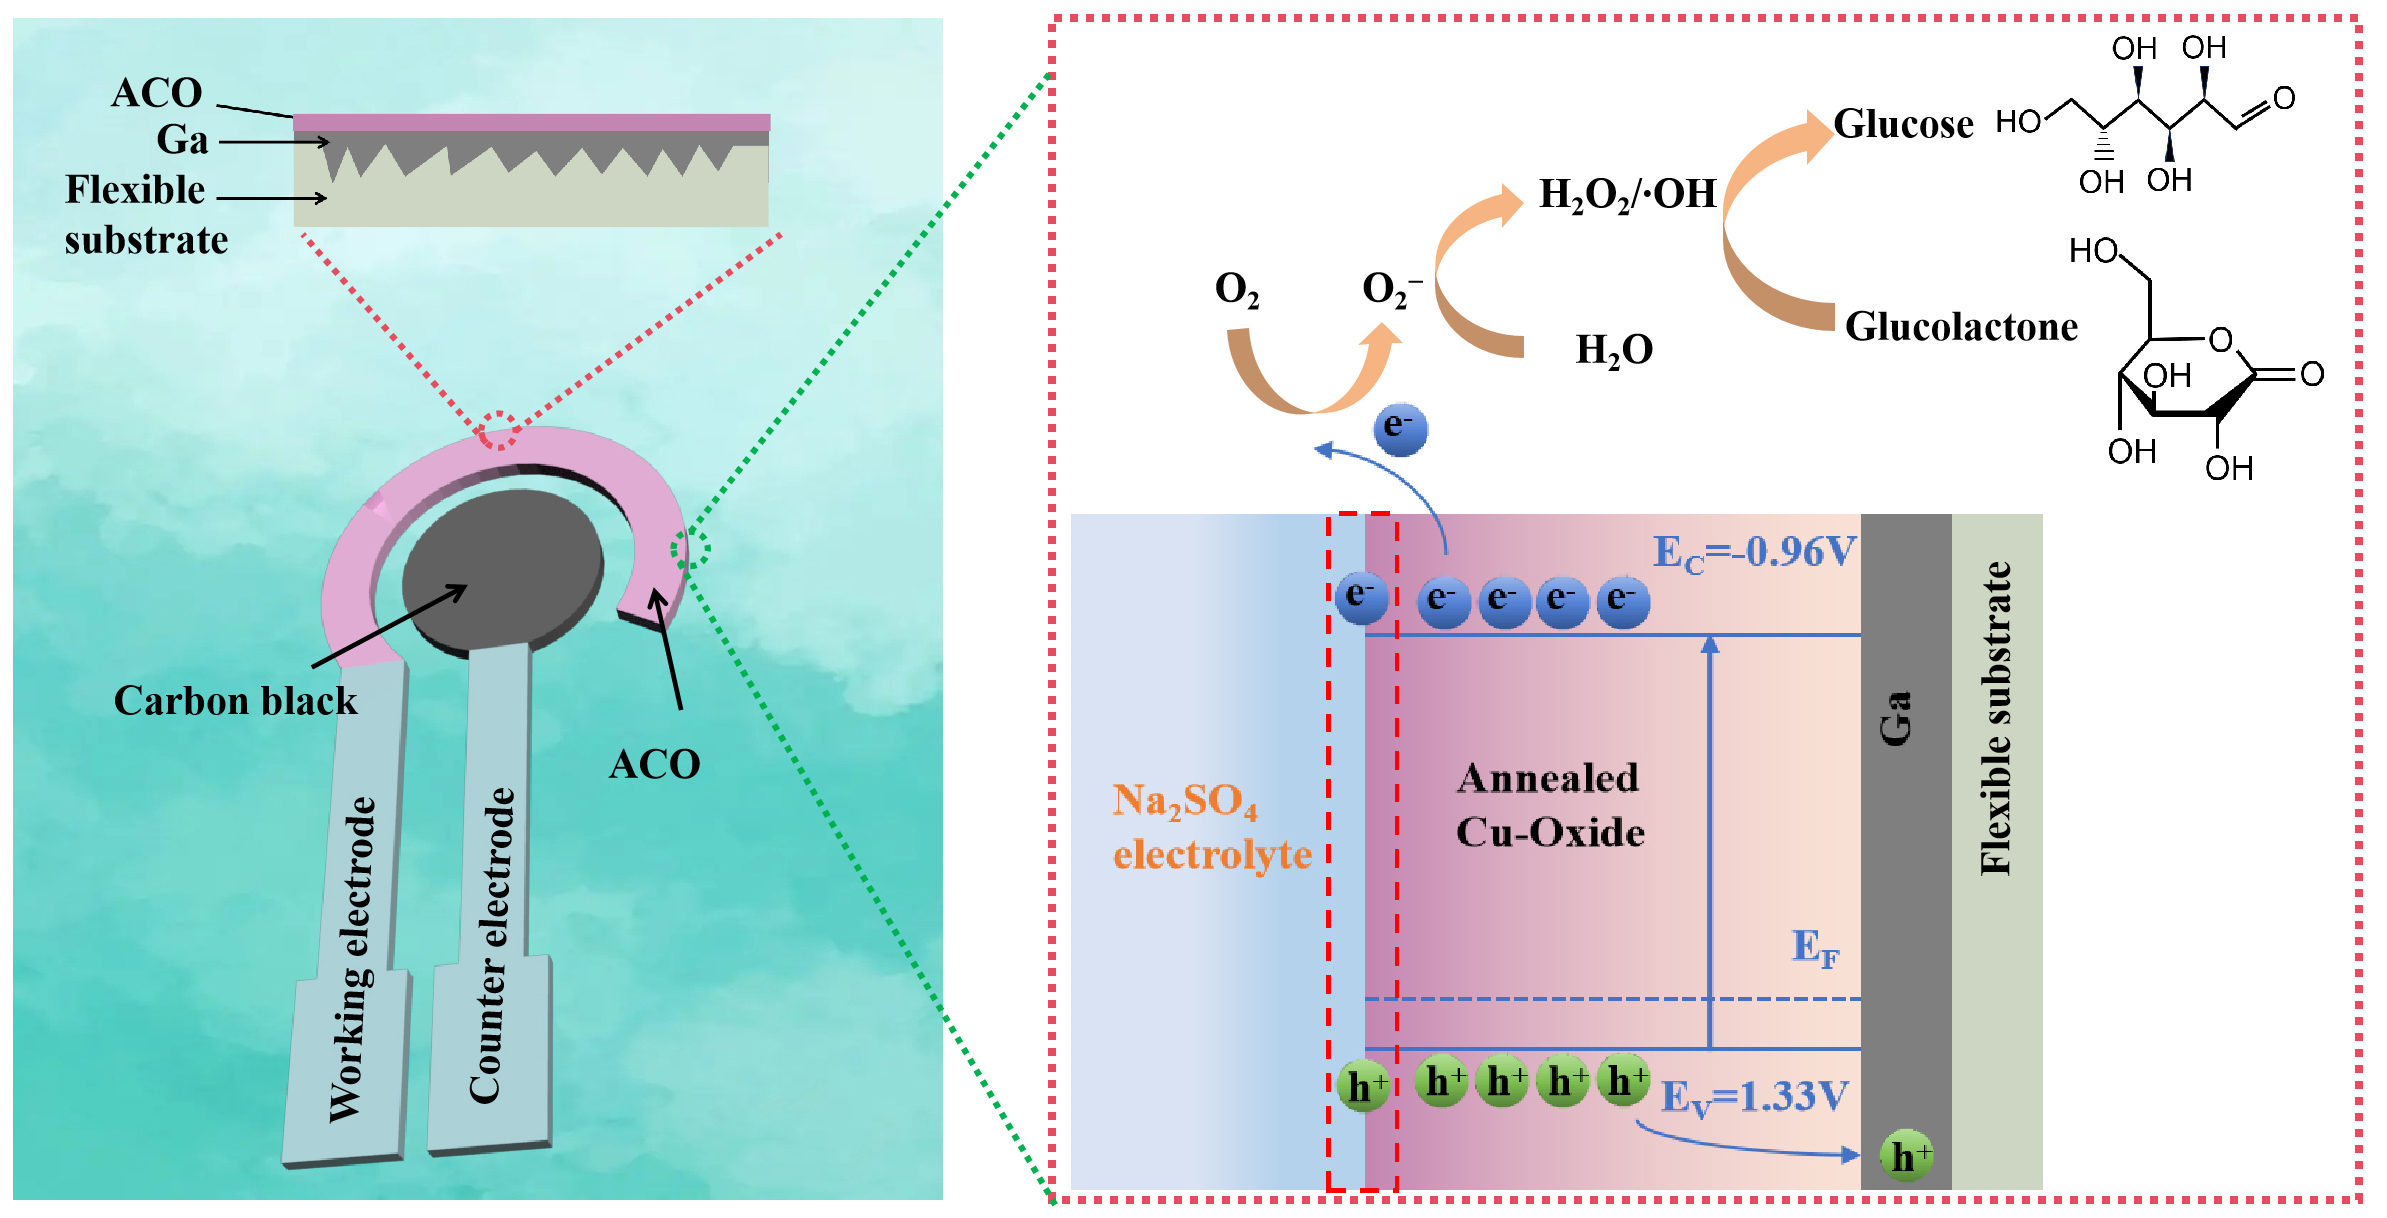 Printing surface cuprous oxides featured liquid metal for non-enzymatic electrochemical glucose sensor